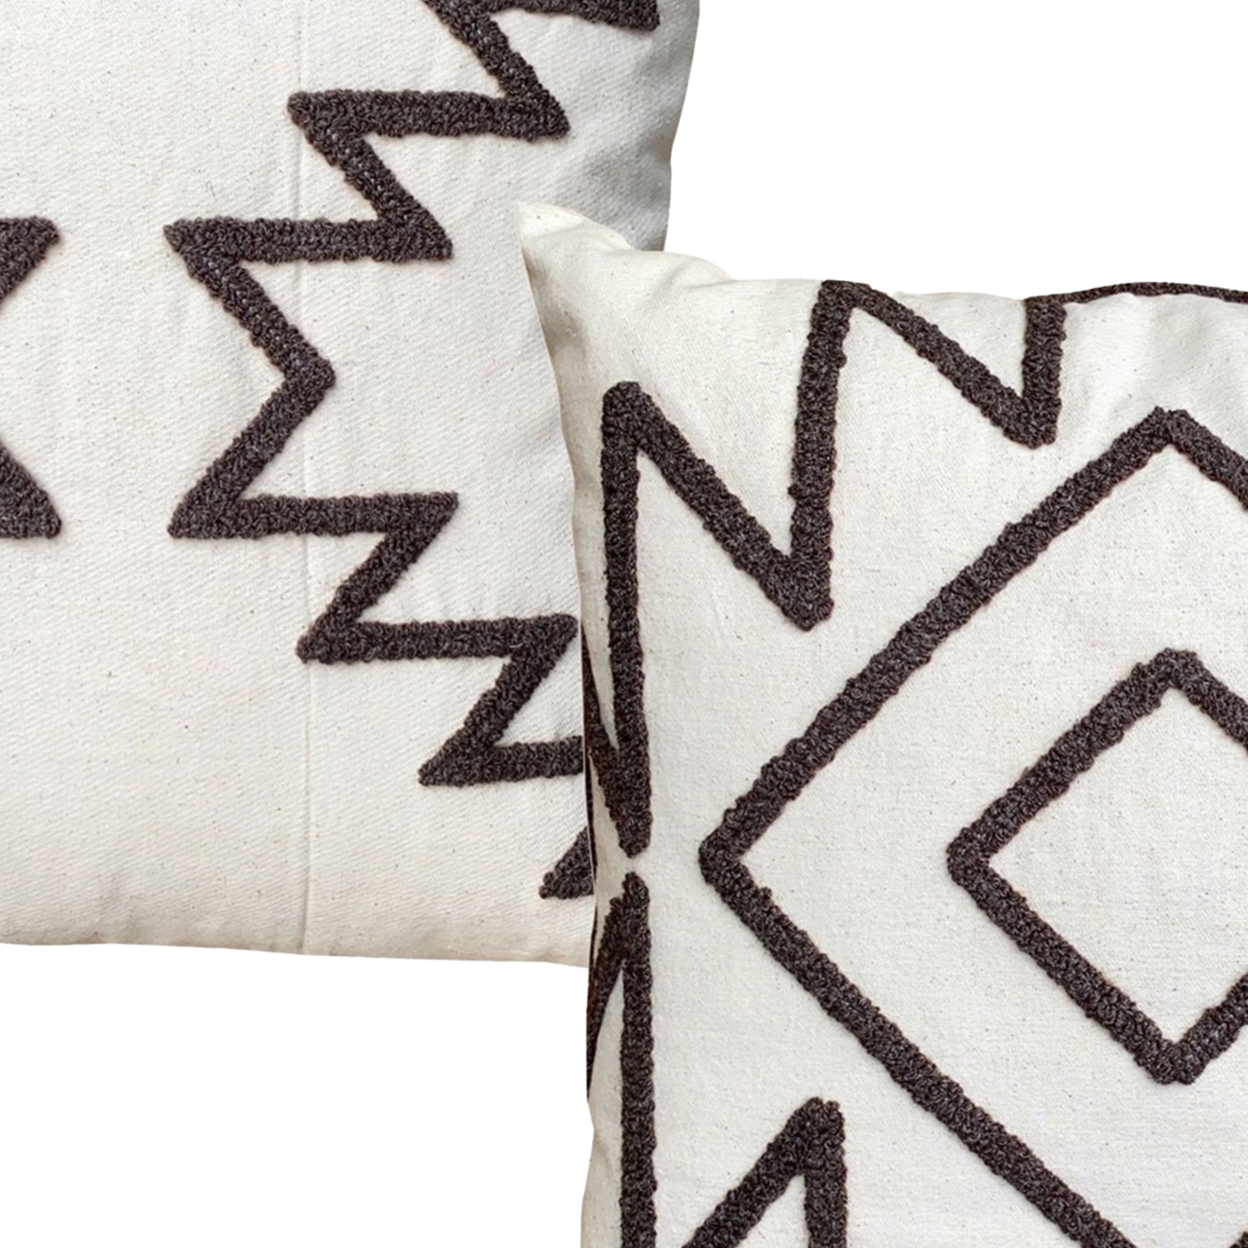 17 X 17 Inch Square Cotton Accent Throw Pillows, Geometric Aztec Embroidery, Set Of 2, White, Gray